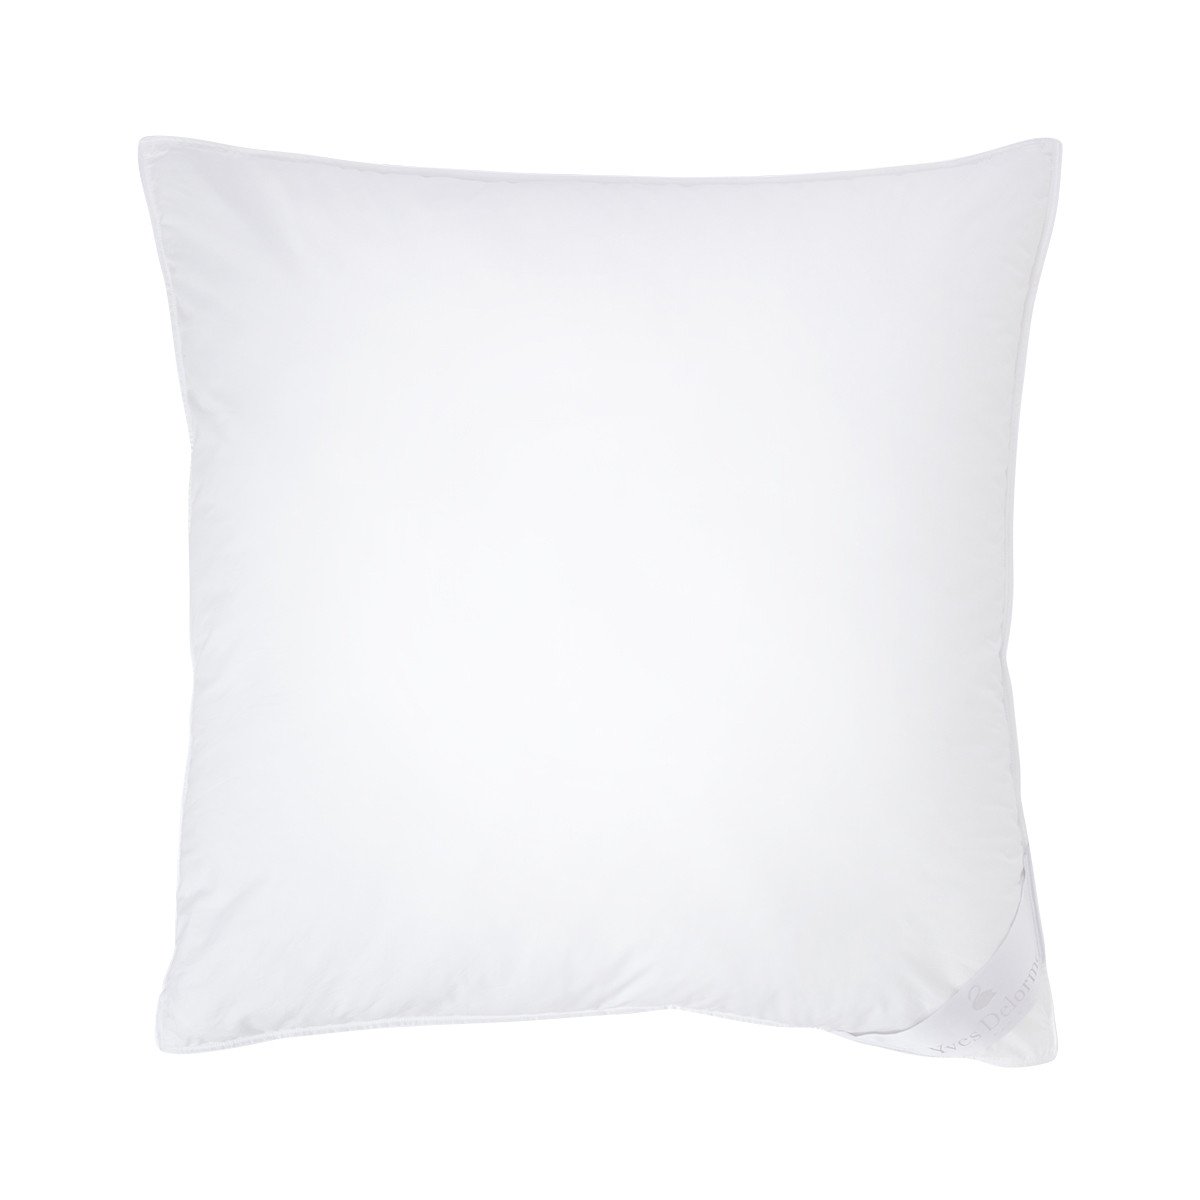 Actuel Anti Allergy Down Alternative Euro Pillow by Yves Delorme